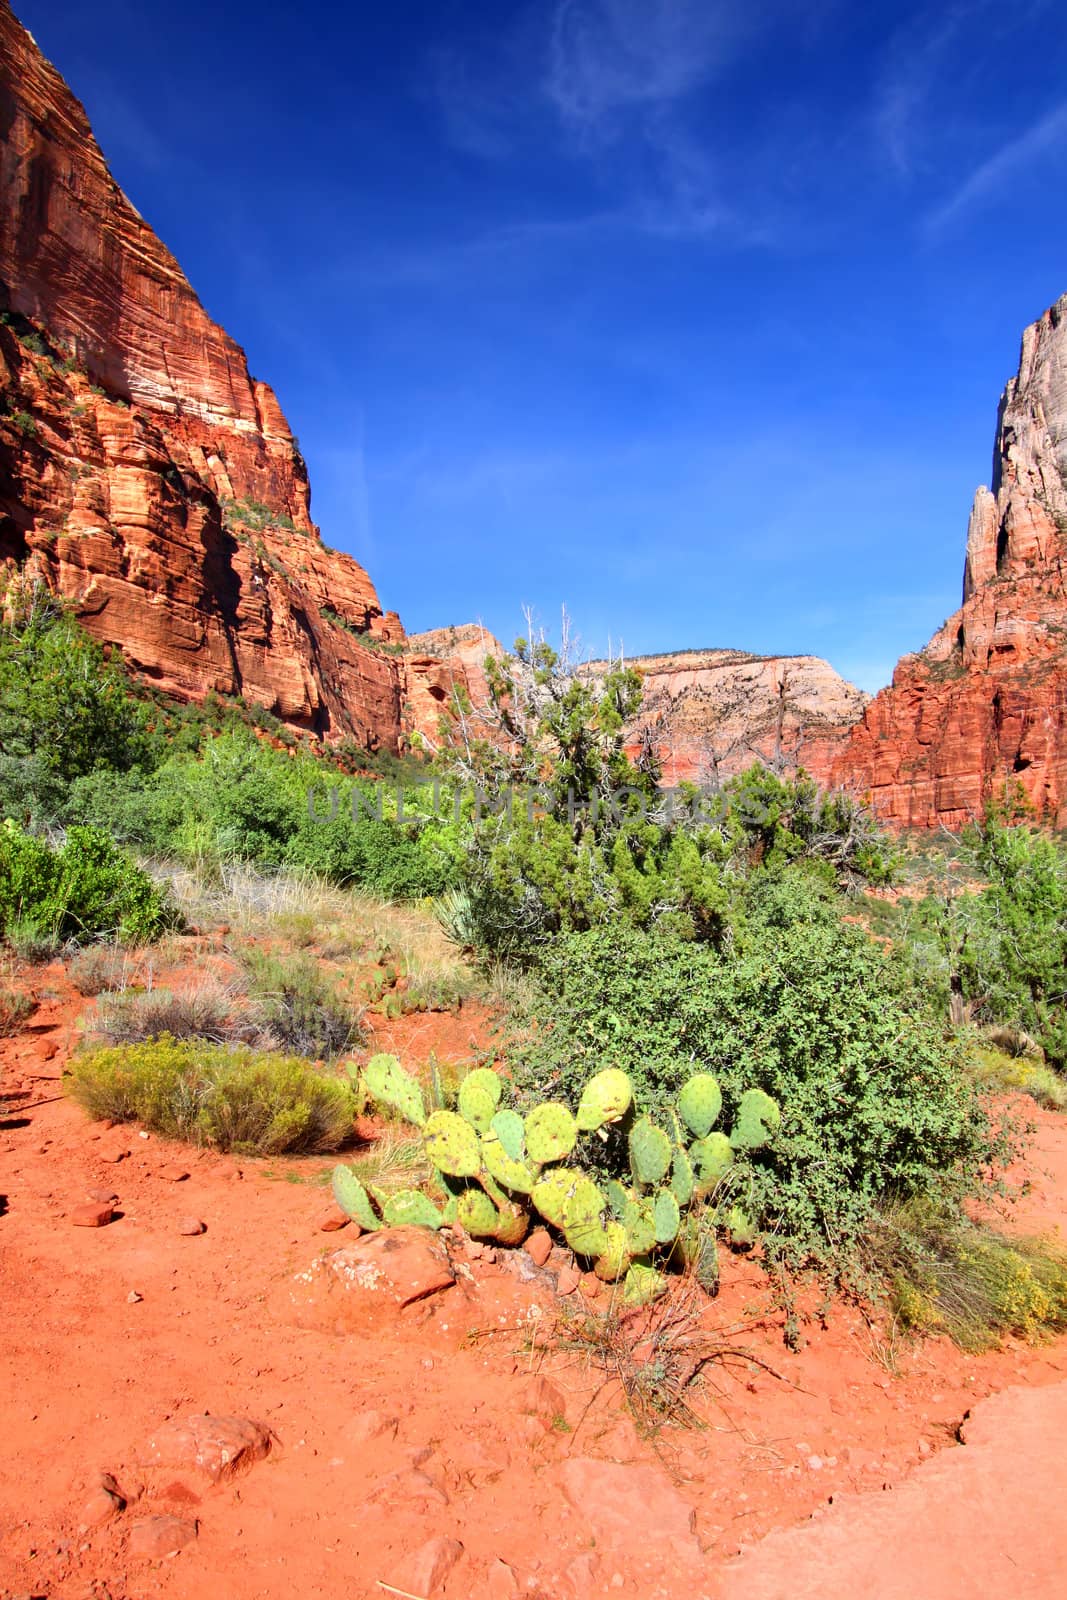 Cactus and other vegetation under towering cliffs along the Kayenta Trail of Zion National Park.